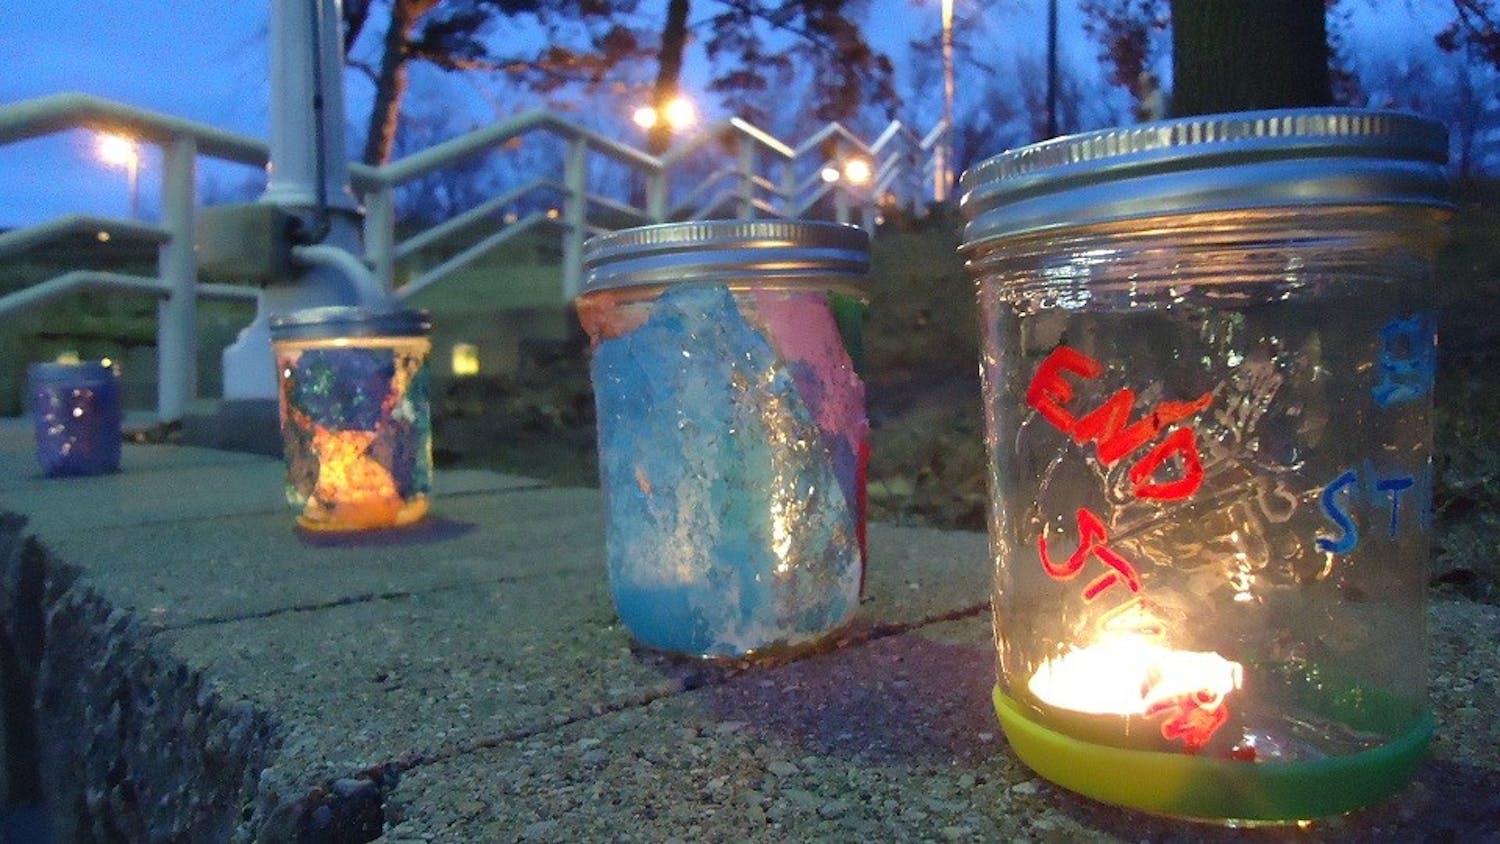 	The Light That Unites was an event in University Park where people decorated candle-lit mason jars honoring suicide victims.